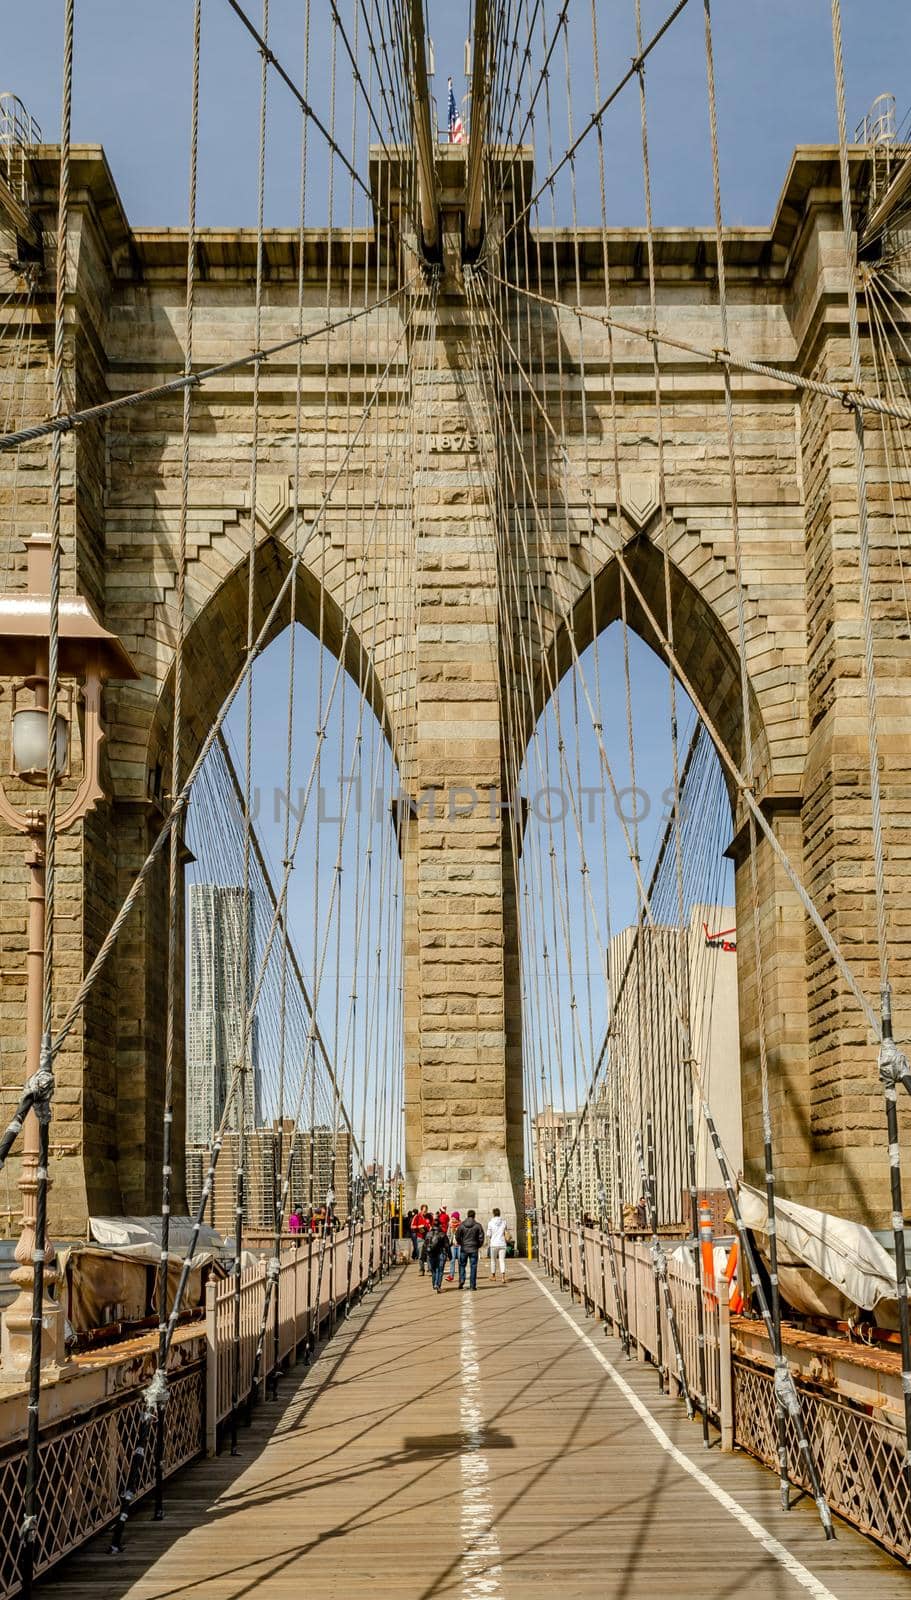 People walking on Brooklyn Bridge during daytime in winter, New York City, construction area on the left and right side on the bridge, vertical